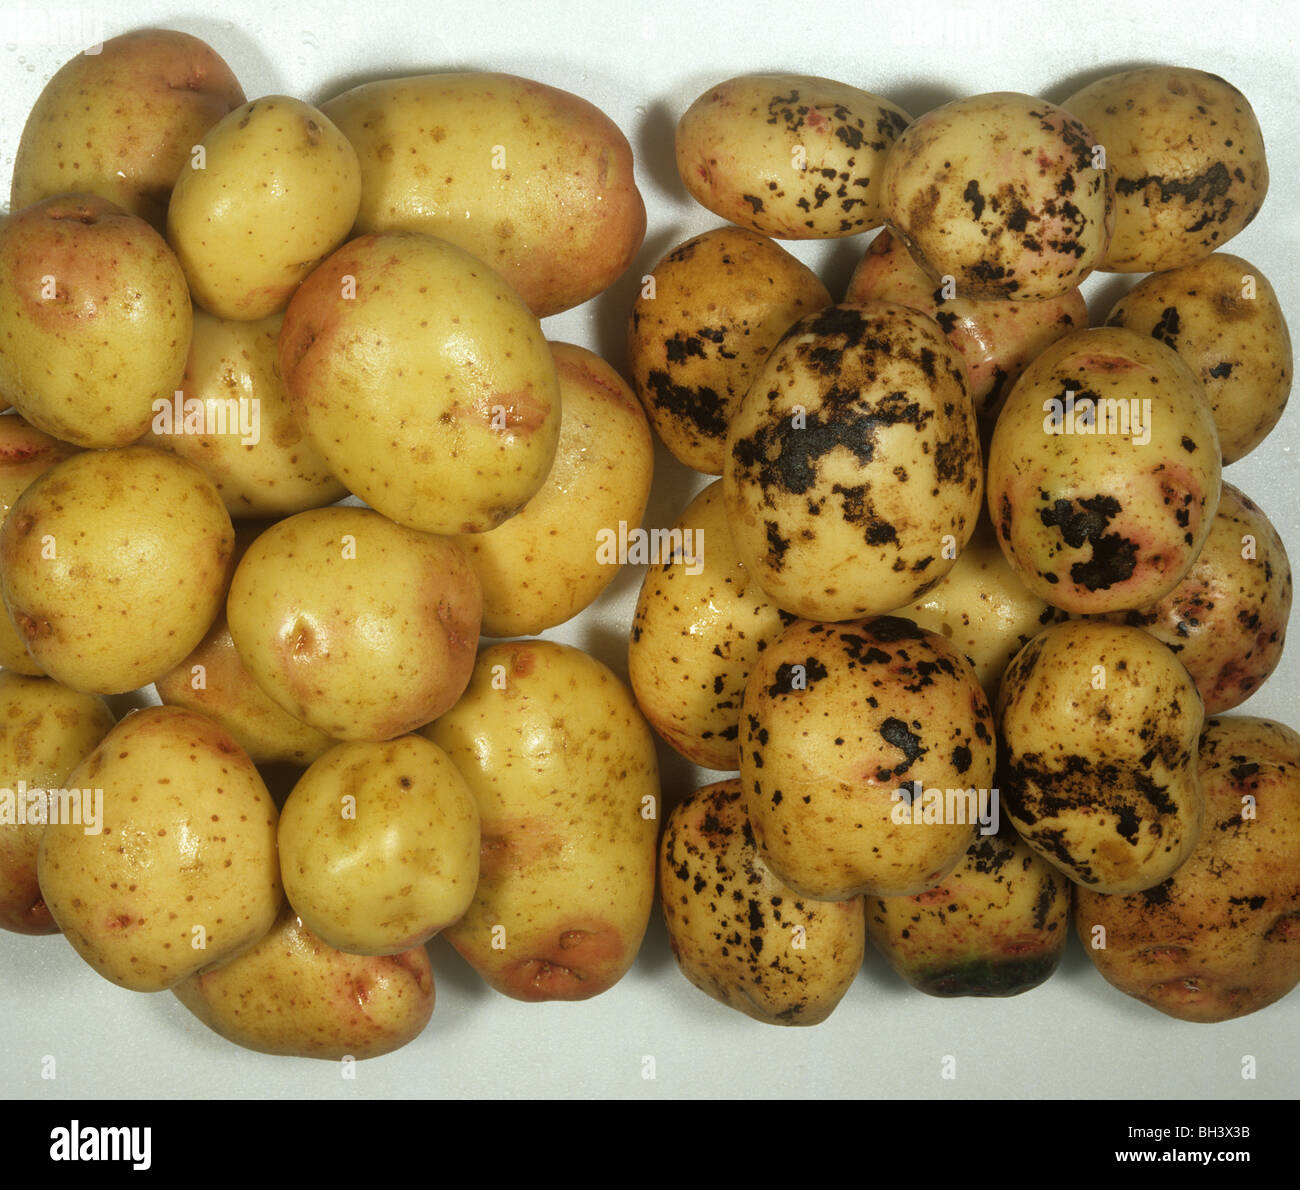 Black scurf (Rhizoctonia solani) diseased harvested potatoes compared to healthy Stock Photo